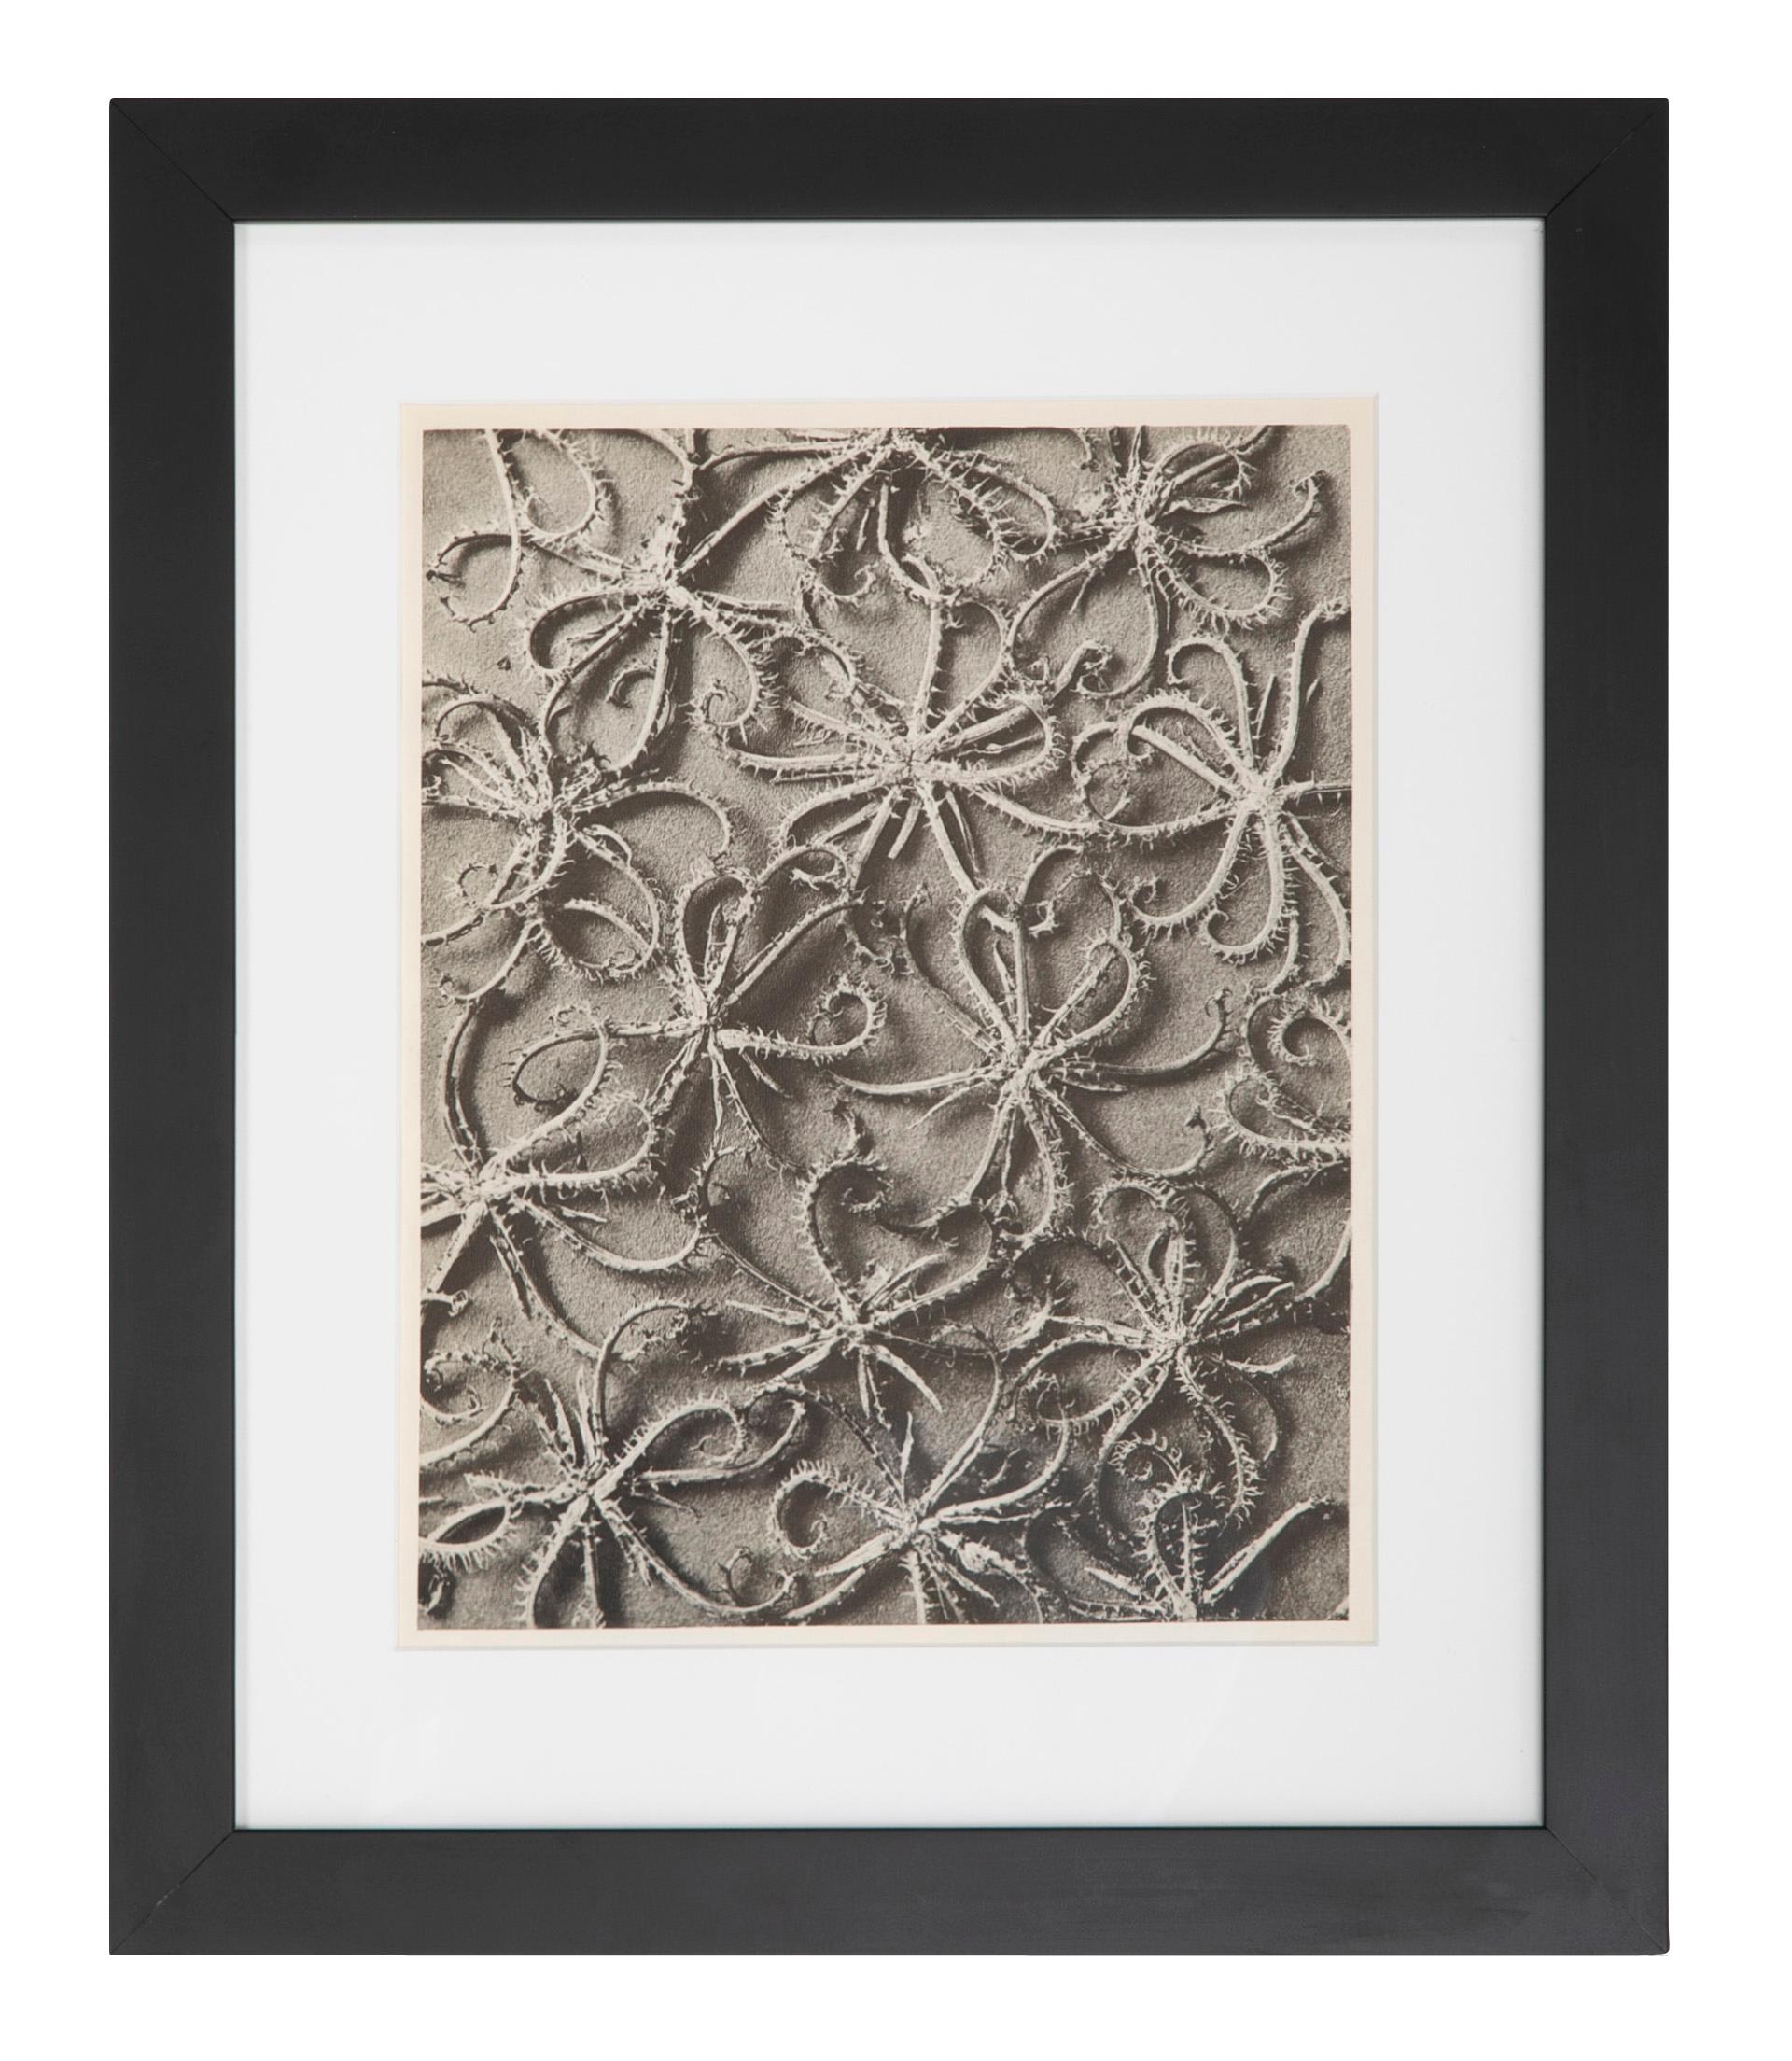 Karl Blossfeldt Photogravures Wundergarten der Natur, 1932. 

Hung together, these make a very impressive and modern wall display. Available in smaller groups or individually at $595 each. More are available. Framed: 17.25 inches high by 14.5 inches